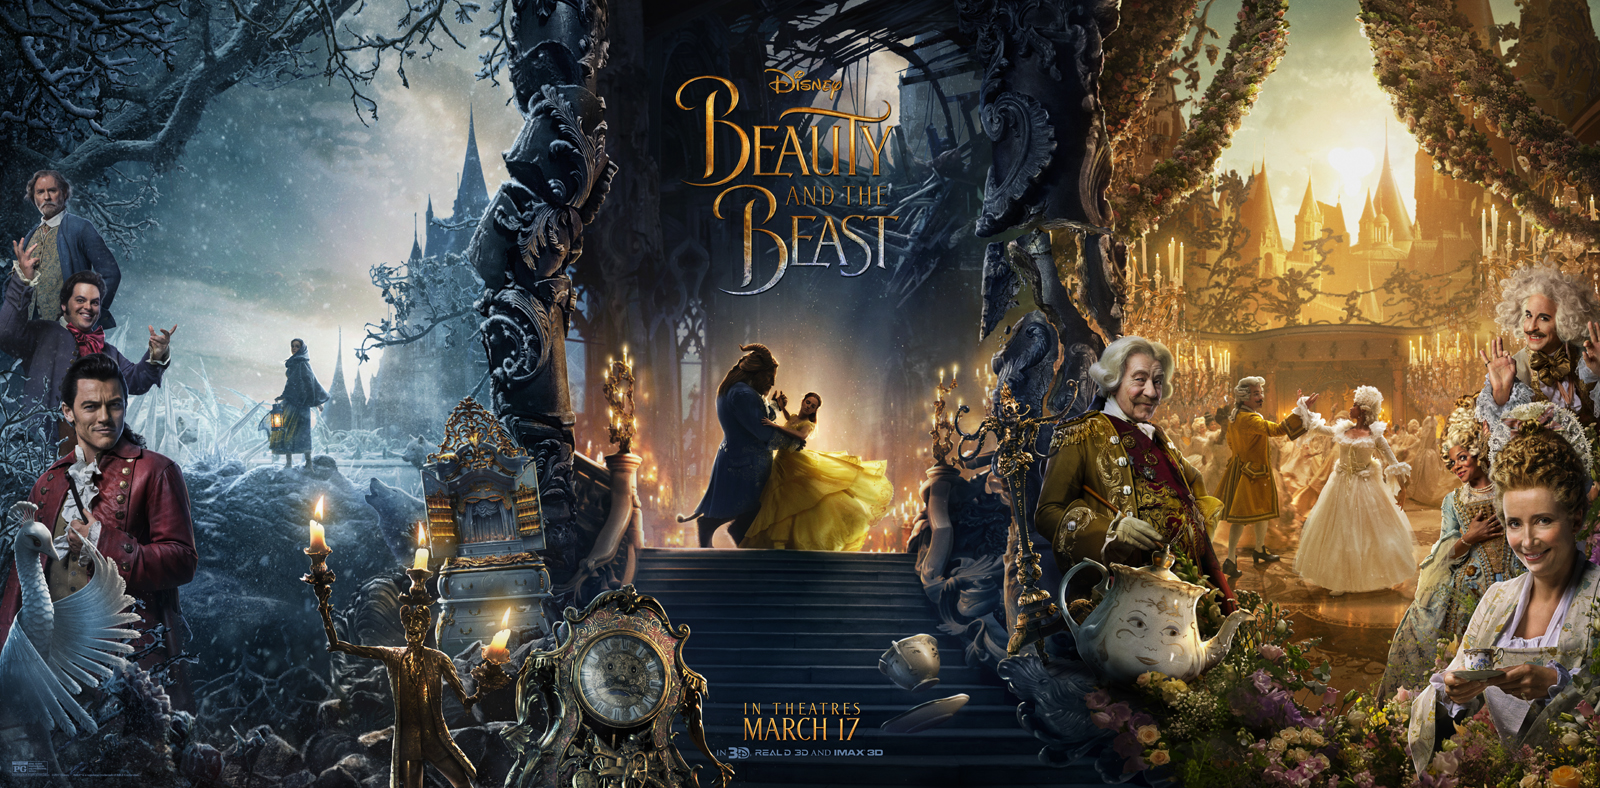 New Trailer for Disney’s Beauty and the Beast